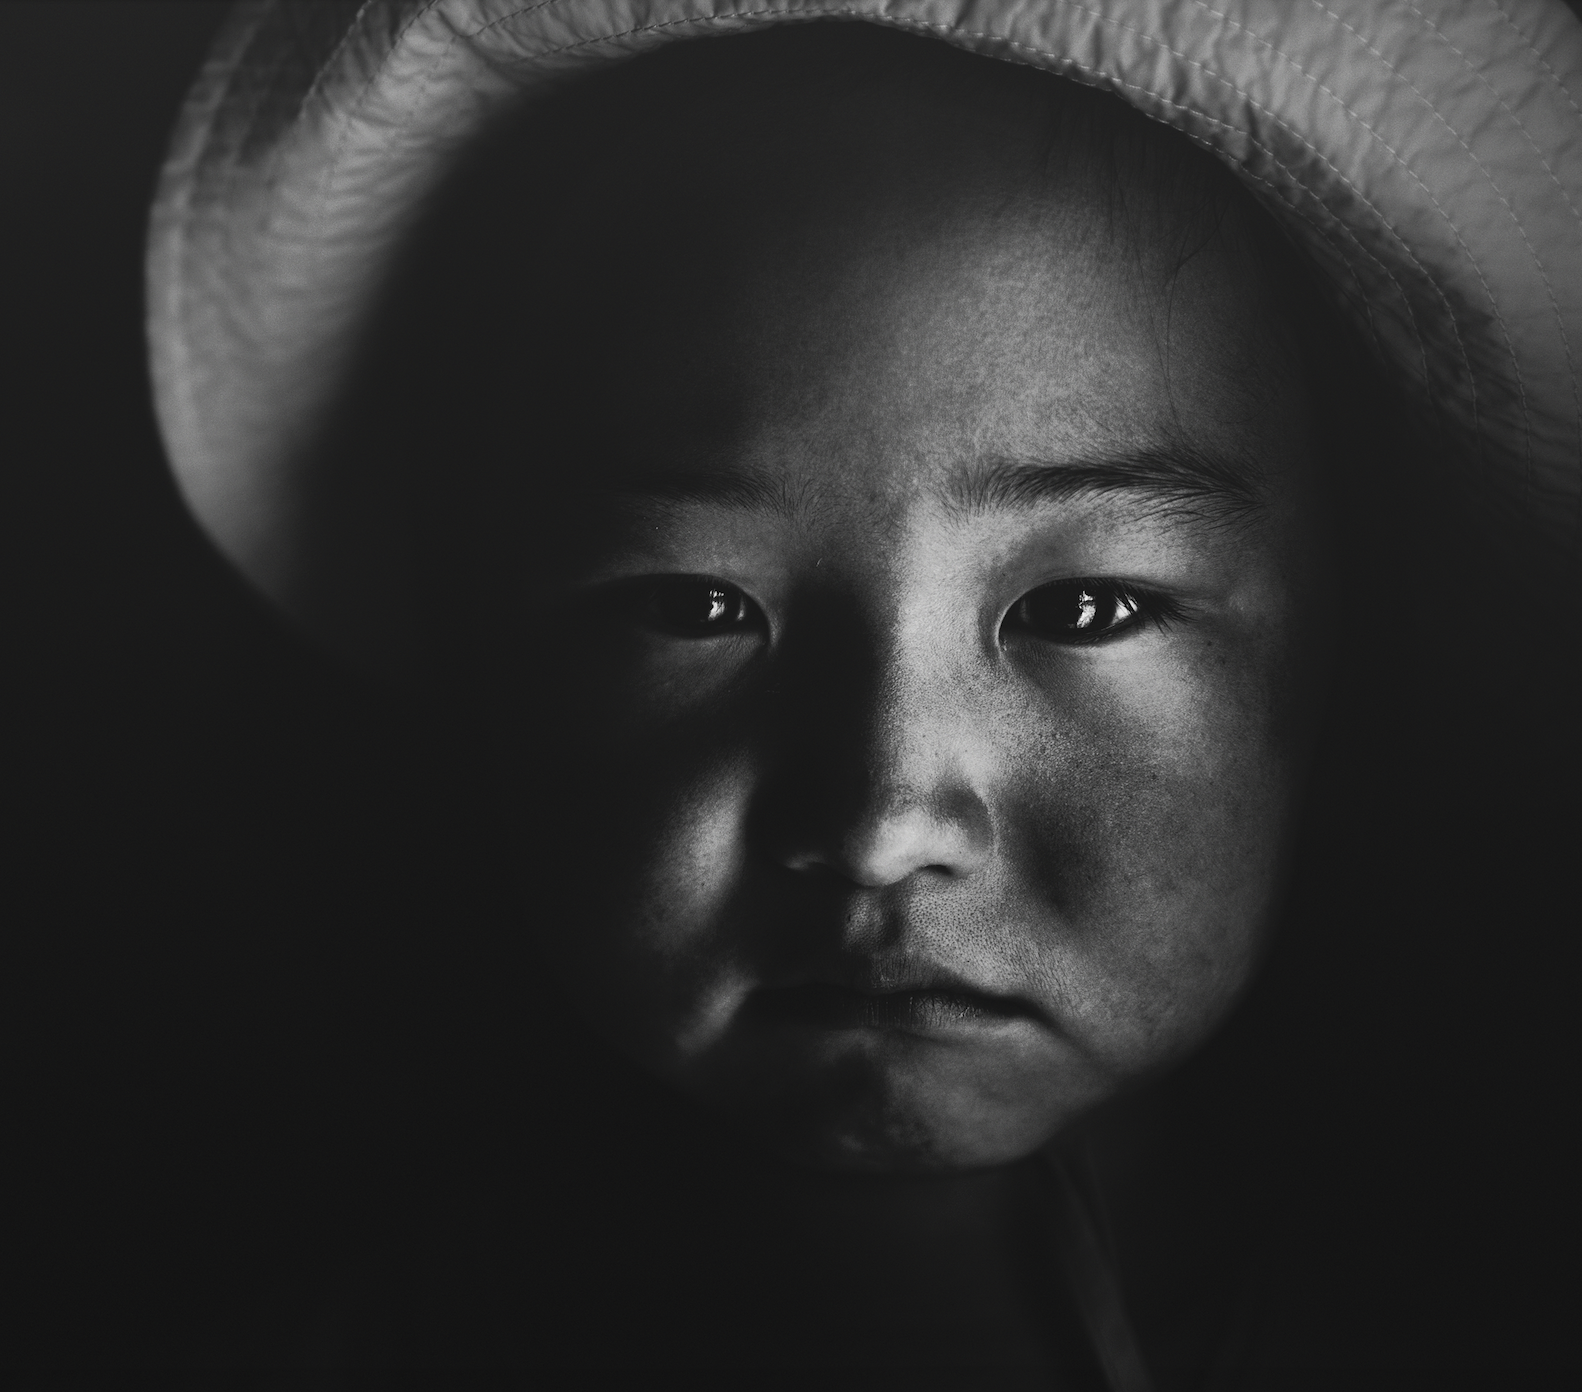 Portrait of a small child's face in black and white with atmospheric lighting from the Qatar-China 2016 Year of Culture.